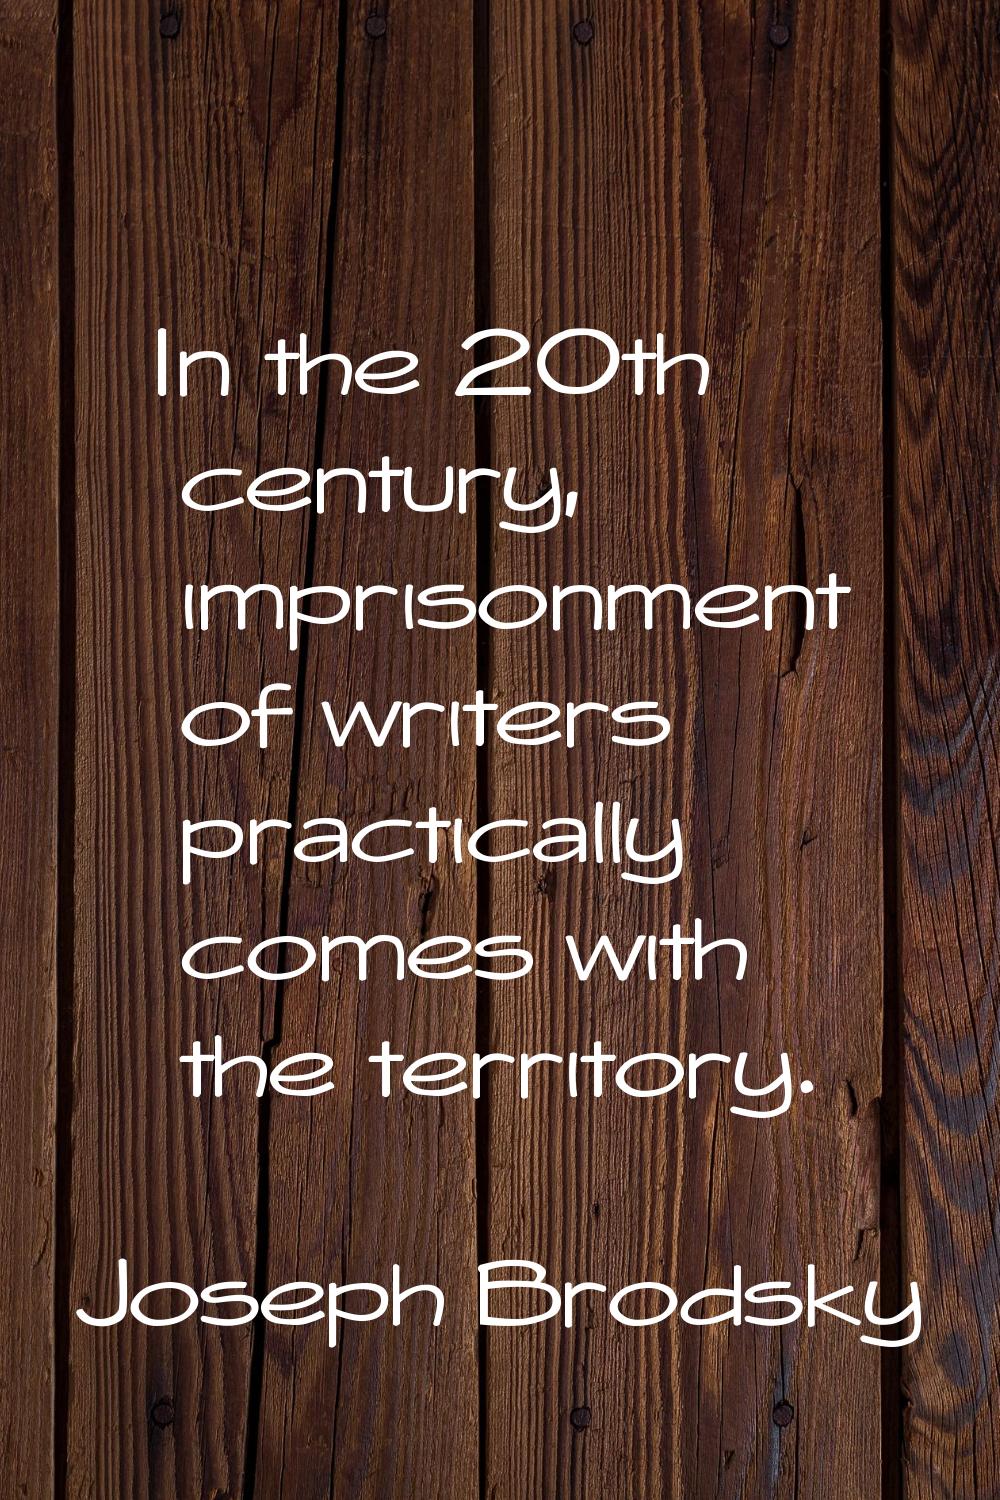 In the 20th century, imprisonment of writers practically comes with the territory.